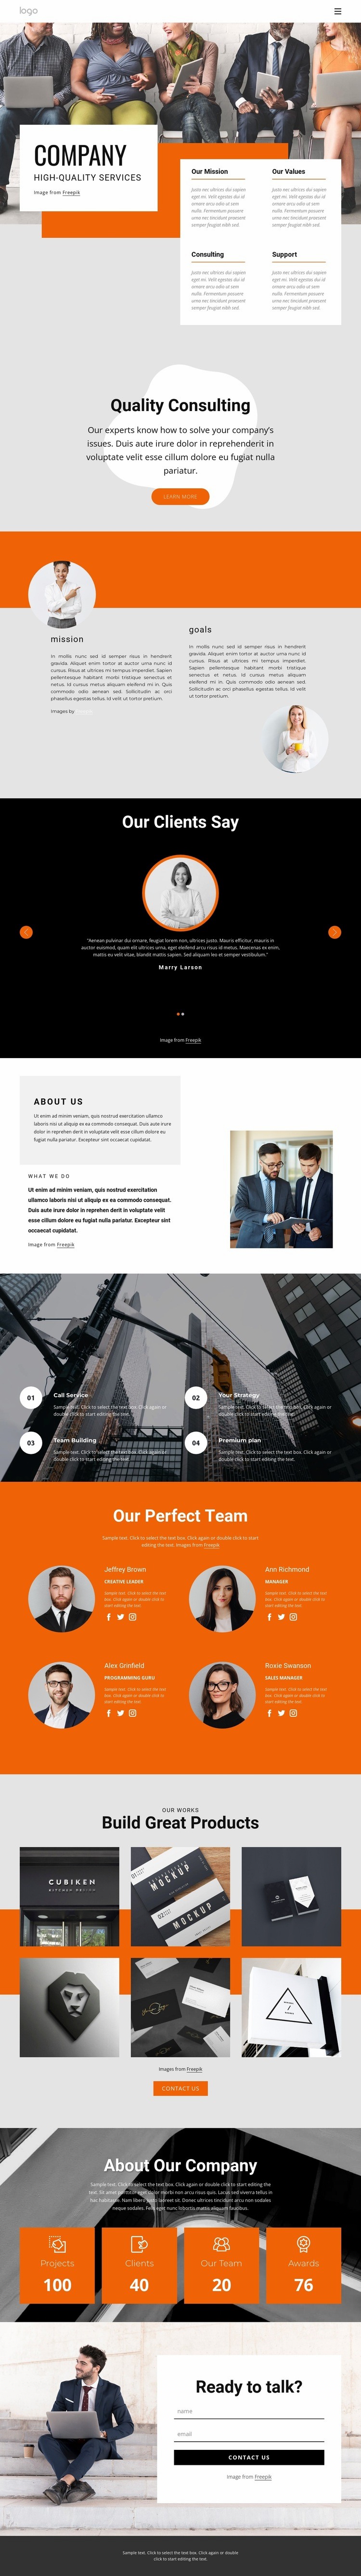 Hight quality consulting firm Webflow Template Alternative